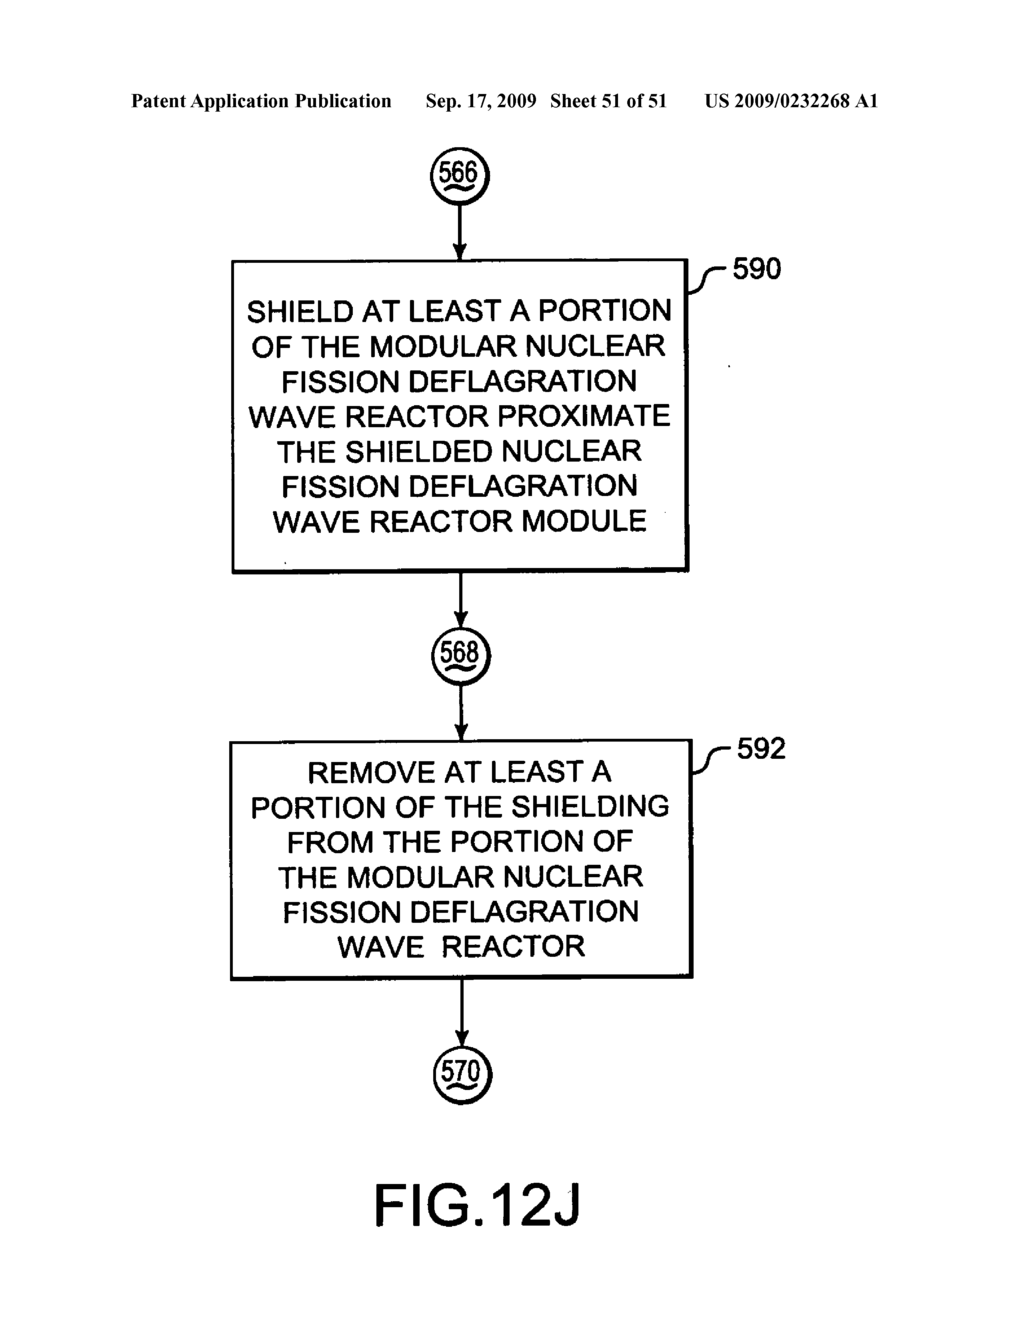 System and method for operating a modular nuclear fission deflagration wave reactor - diagram, schematic, and image 52